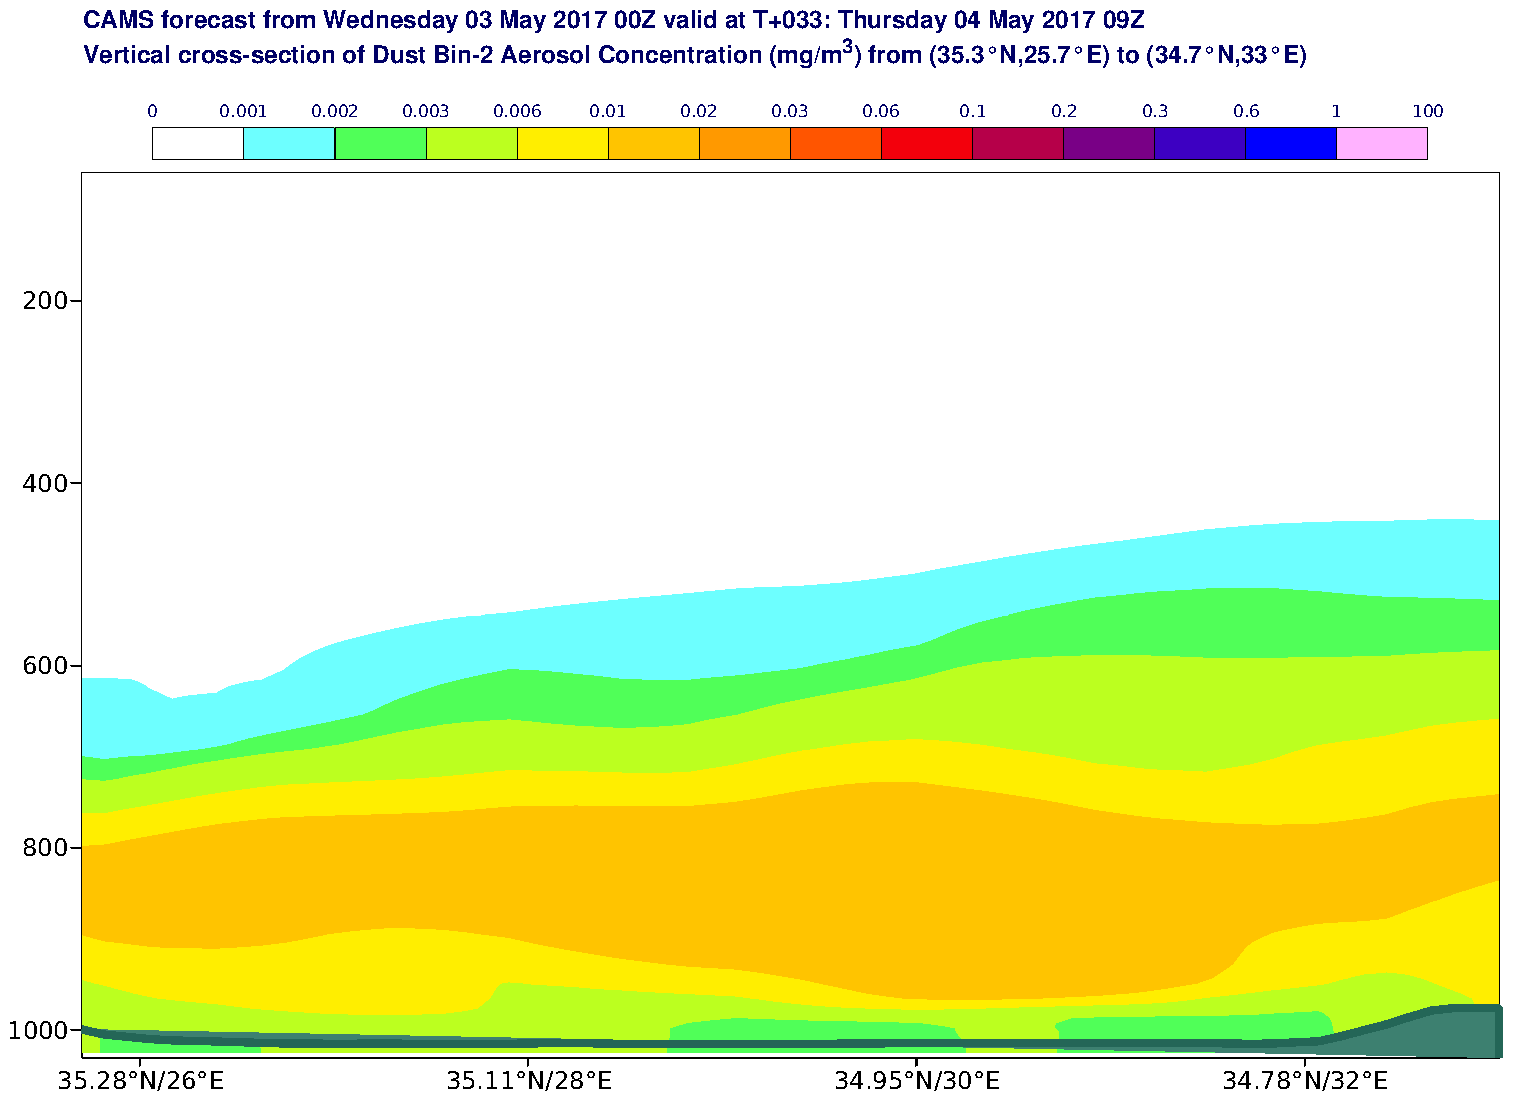 Vertical cross-section of Dust Bin-2 Aerosol Concentration (mg/m3) valid at T33 - 2017-05-04 09:00